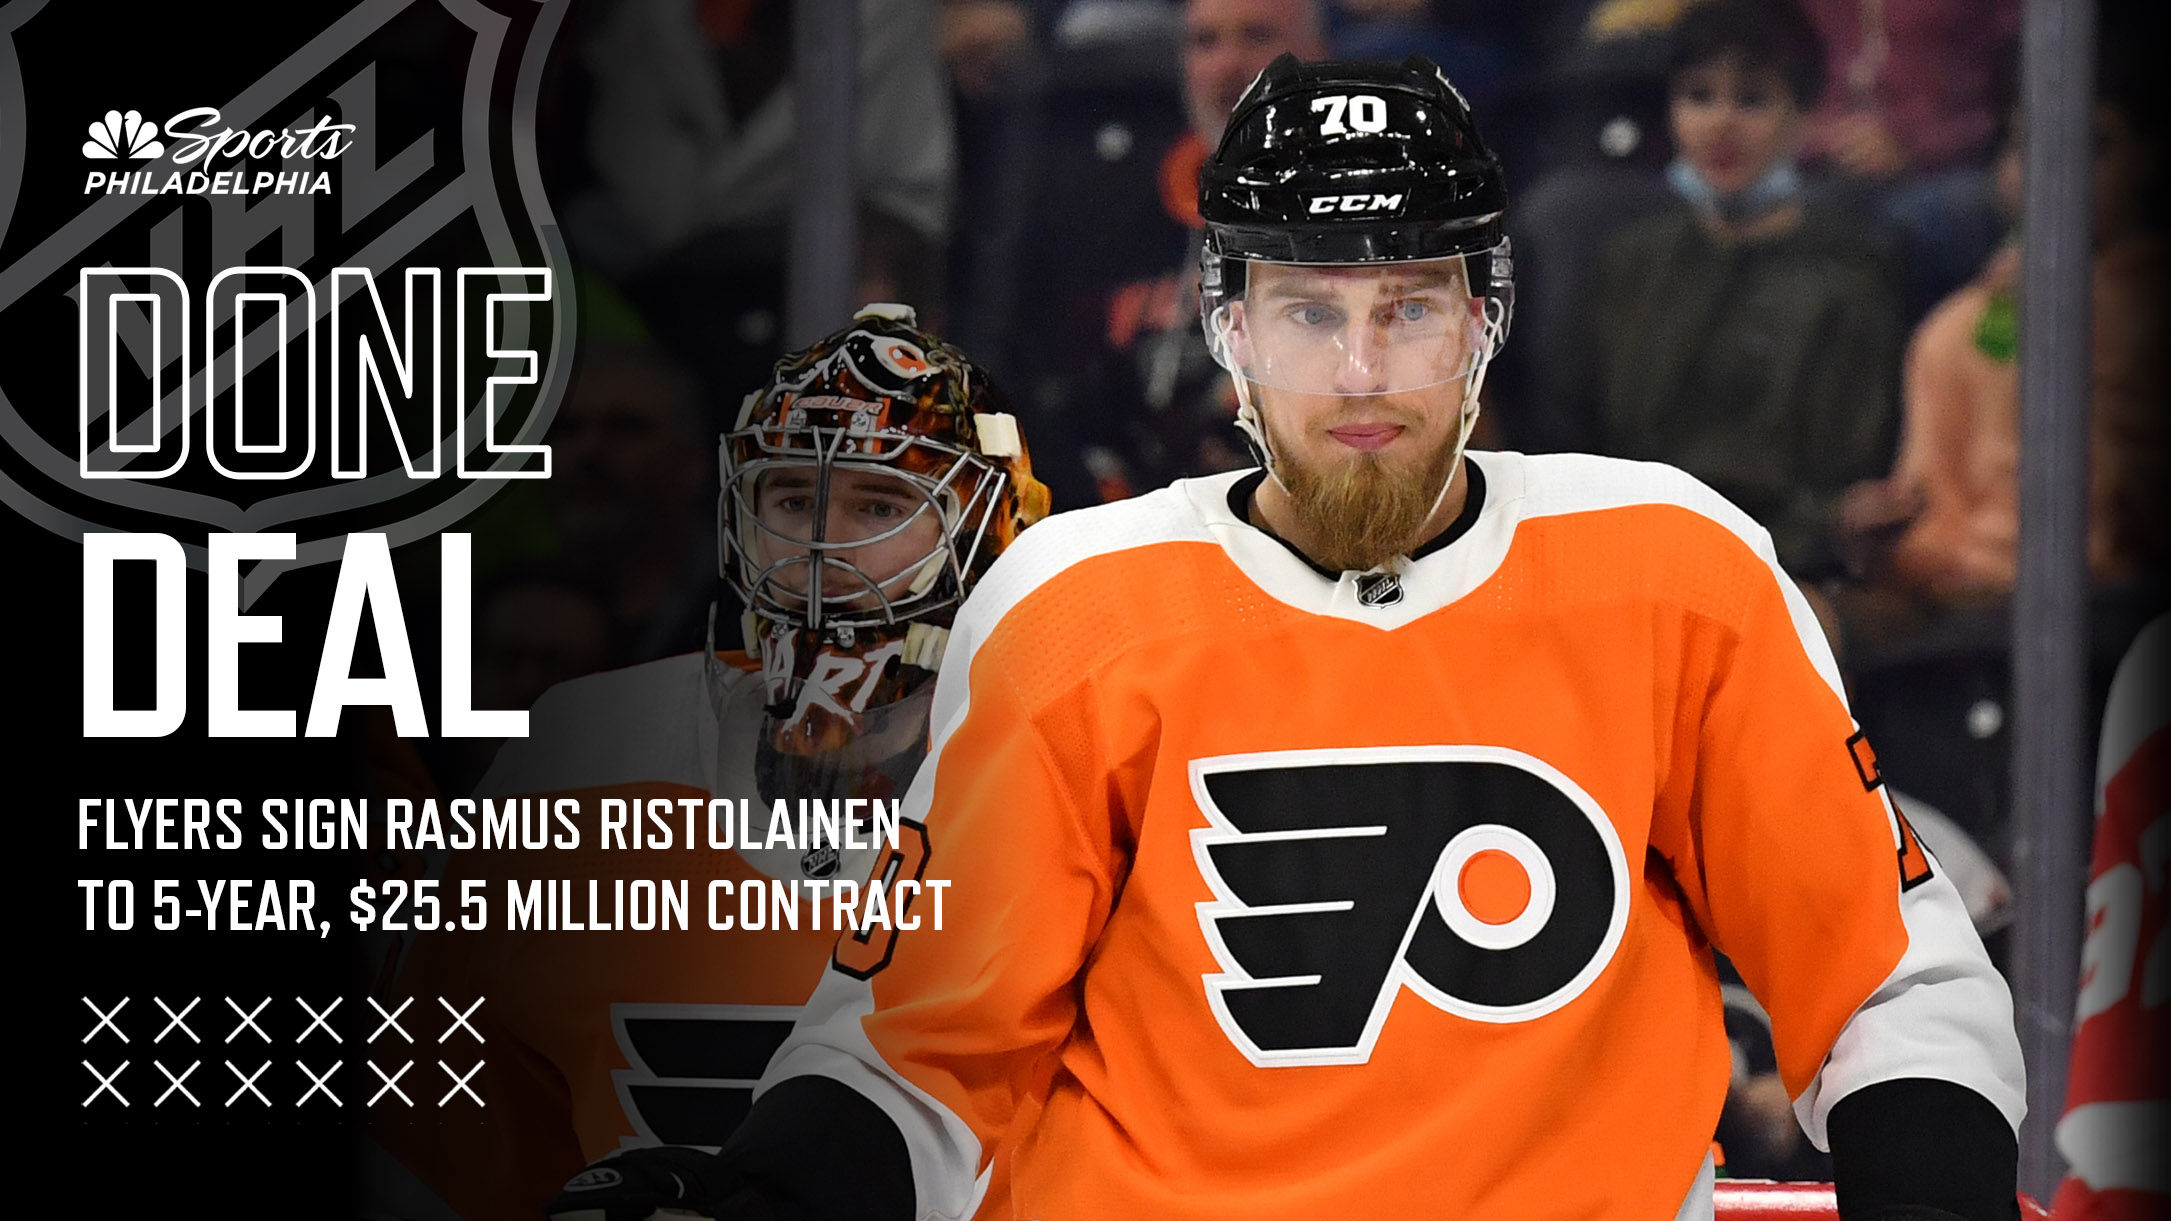 OFFICIAL: The Flyers have extended defenseman Rasmus Ristolainen